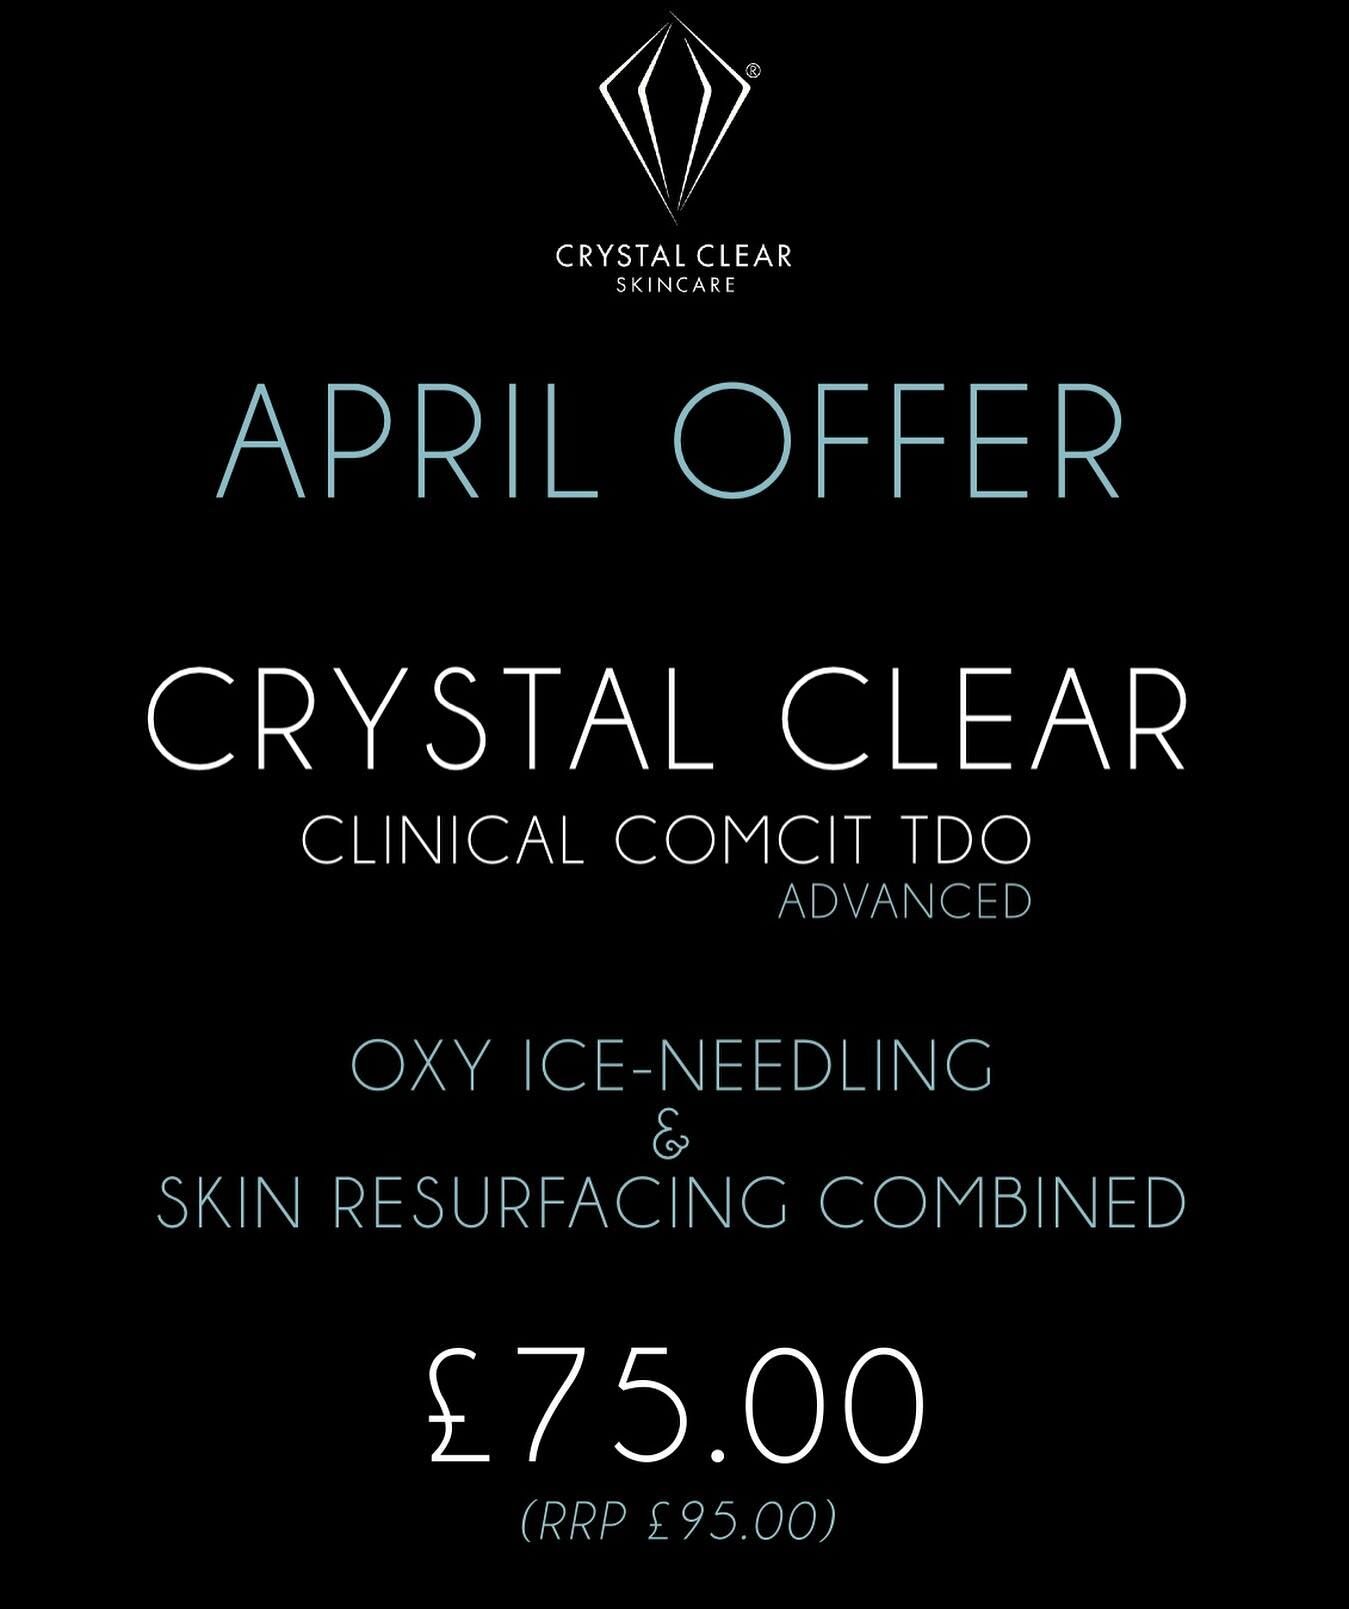 ✨ We are excited to introduce our NEW latest age defying treatment to the salon! 🤗 CRYSTAL CLEAR CLINICAL COMCIT TDO 🫧 ✨ Experience the skin benefits of 185% topical dissolved oxygen, oxygen-ice needling, skin resurfacing with Photo therapy light &